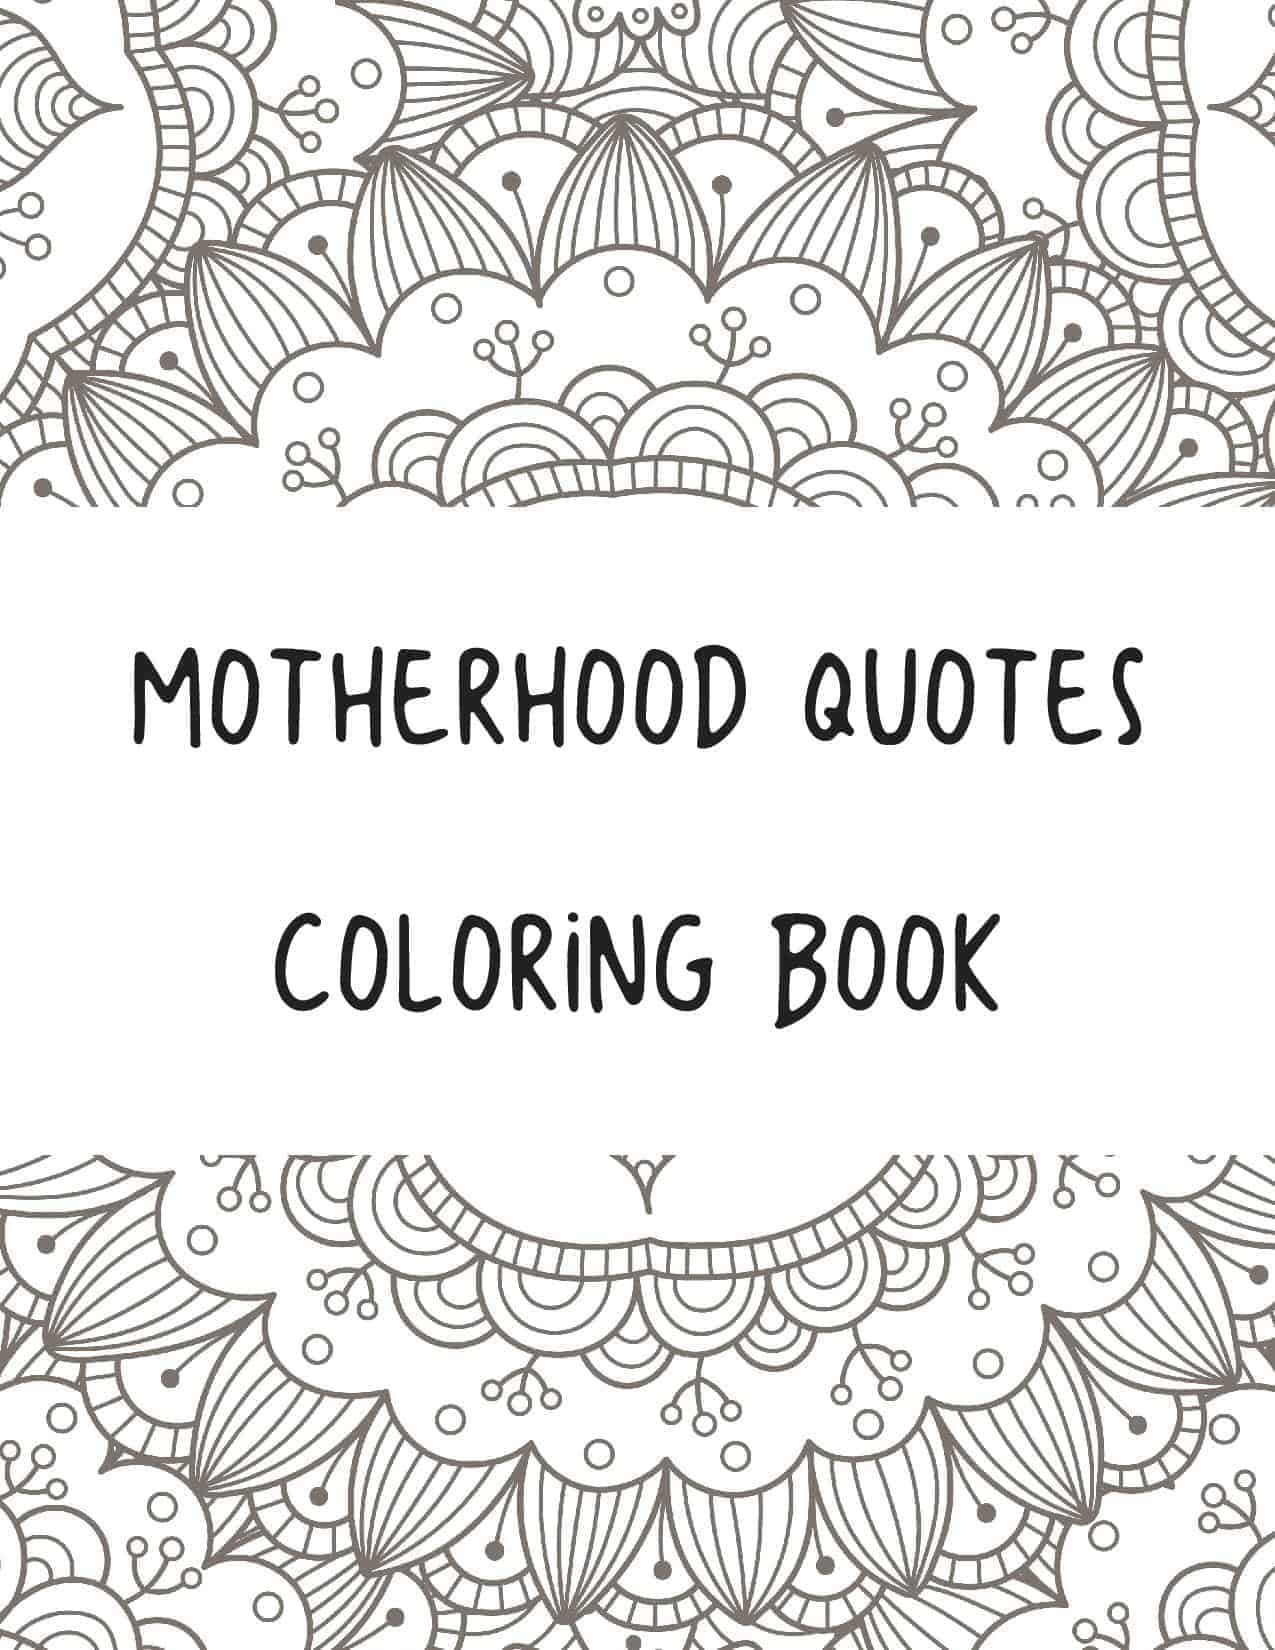 Quotes Coloring Book
 Free Printable Quotes on Motherhood Coloring Book